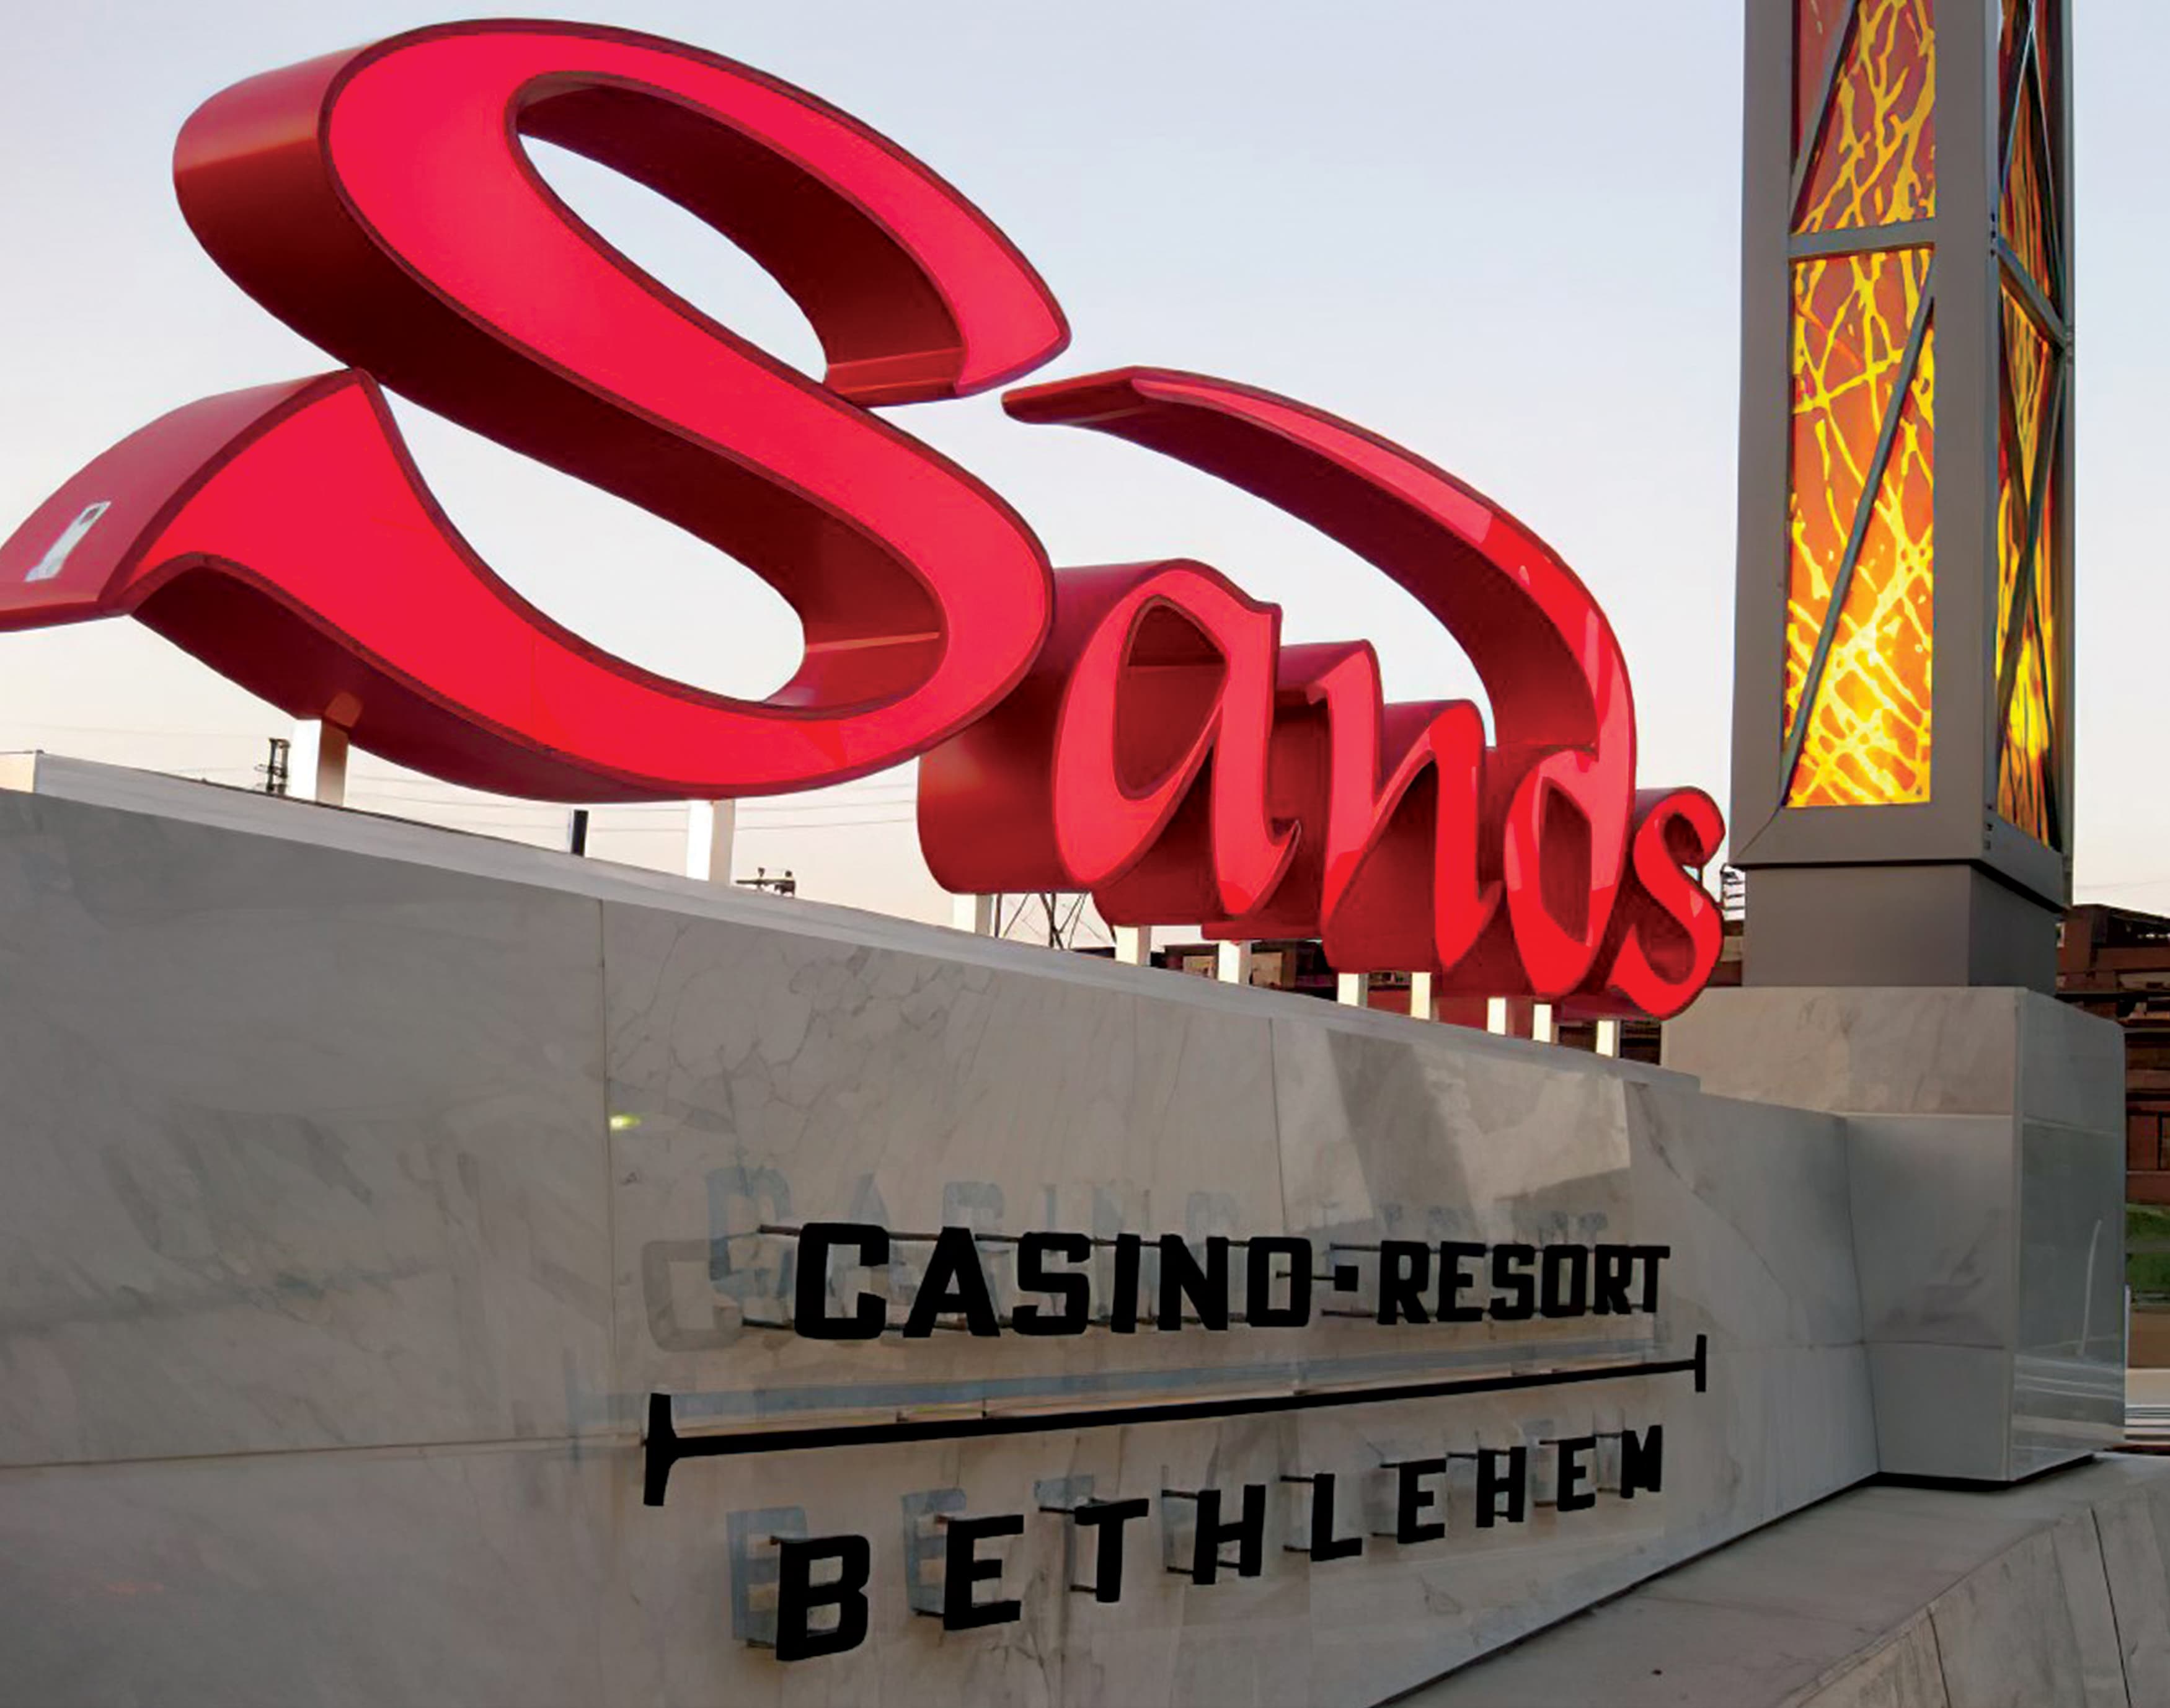 A detail photograph of an illuminated monument sign at Sands Casino Resort Bethlehem.